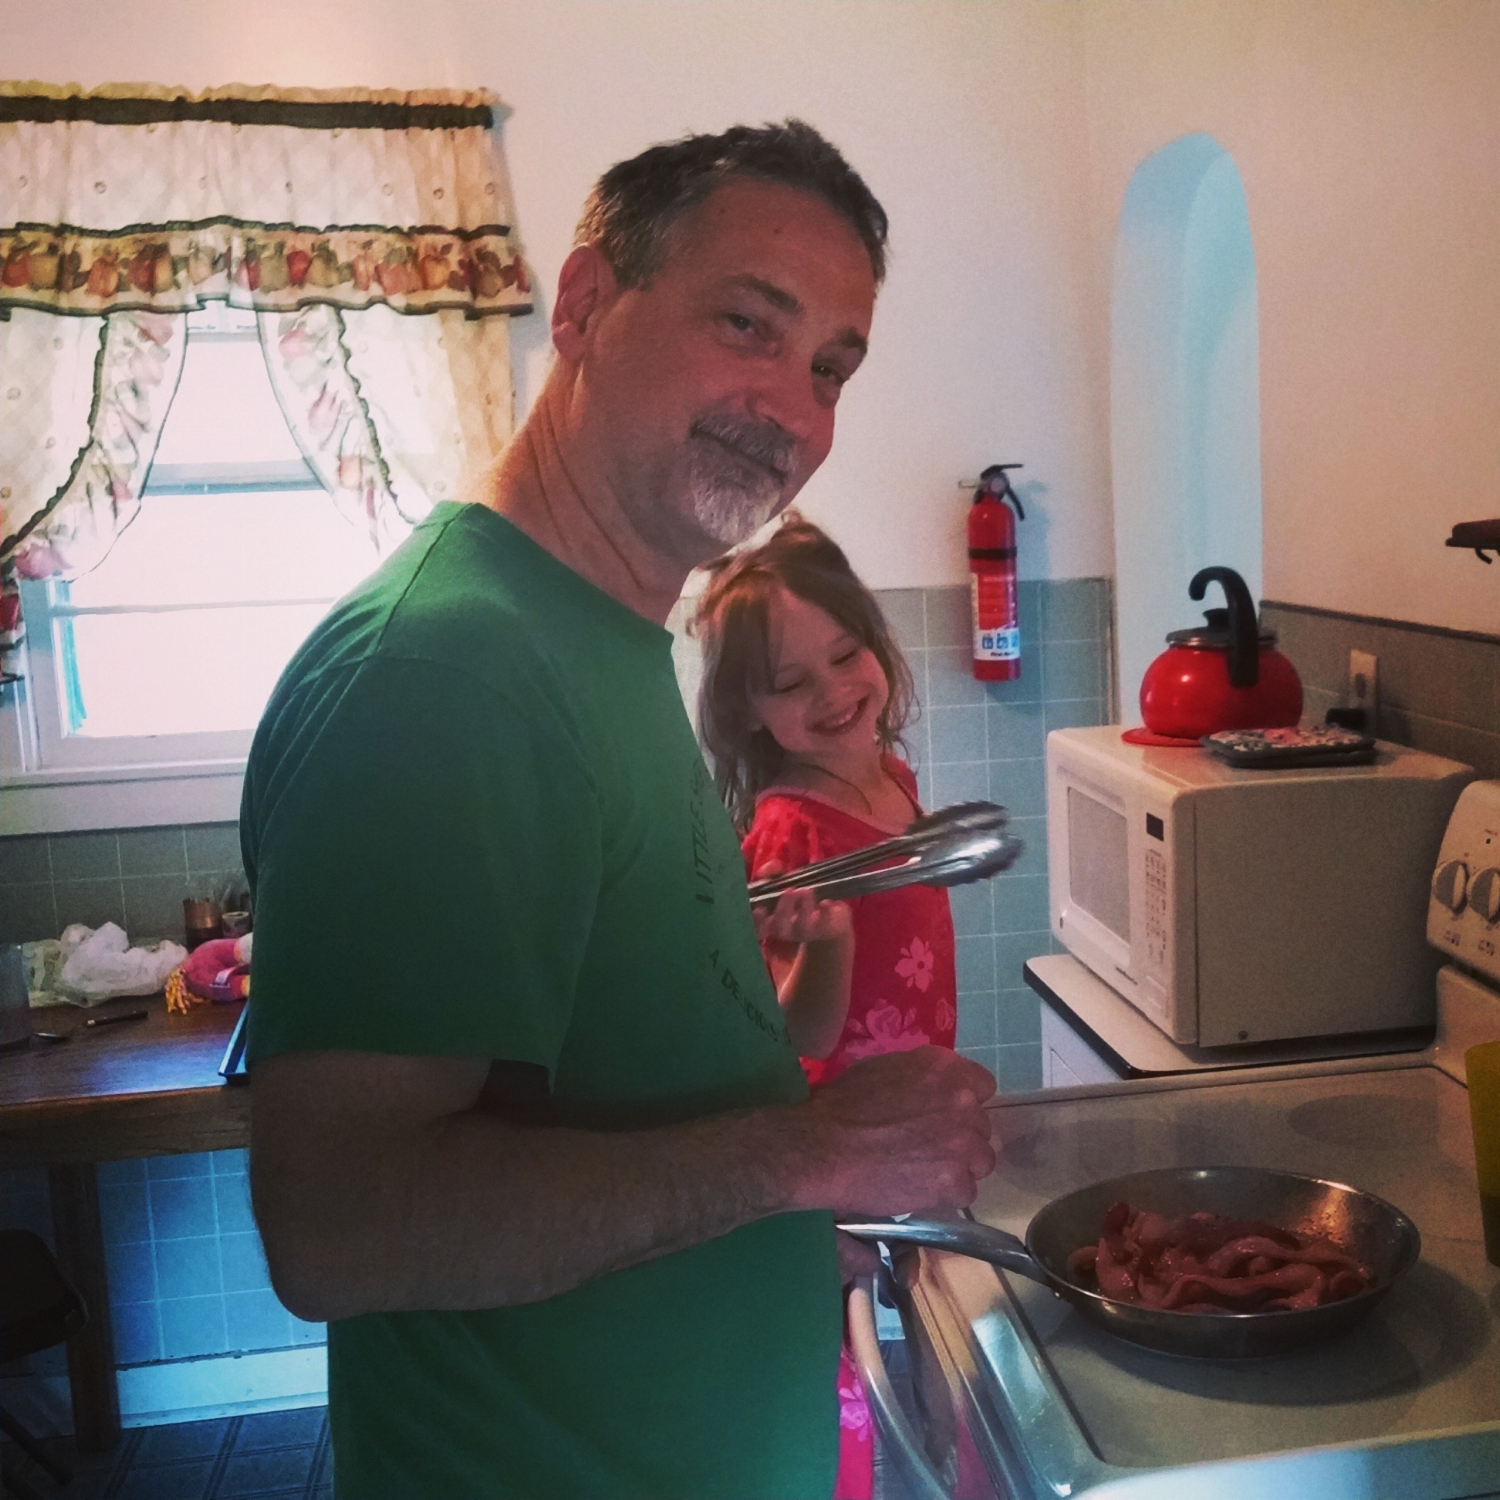 Dr. McVey with his granddaughter cooking bacon